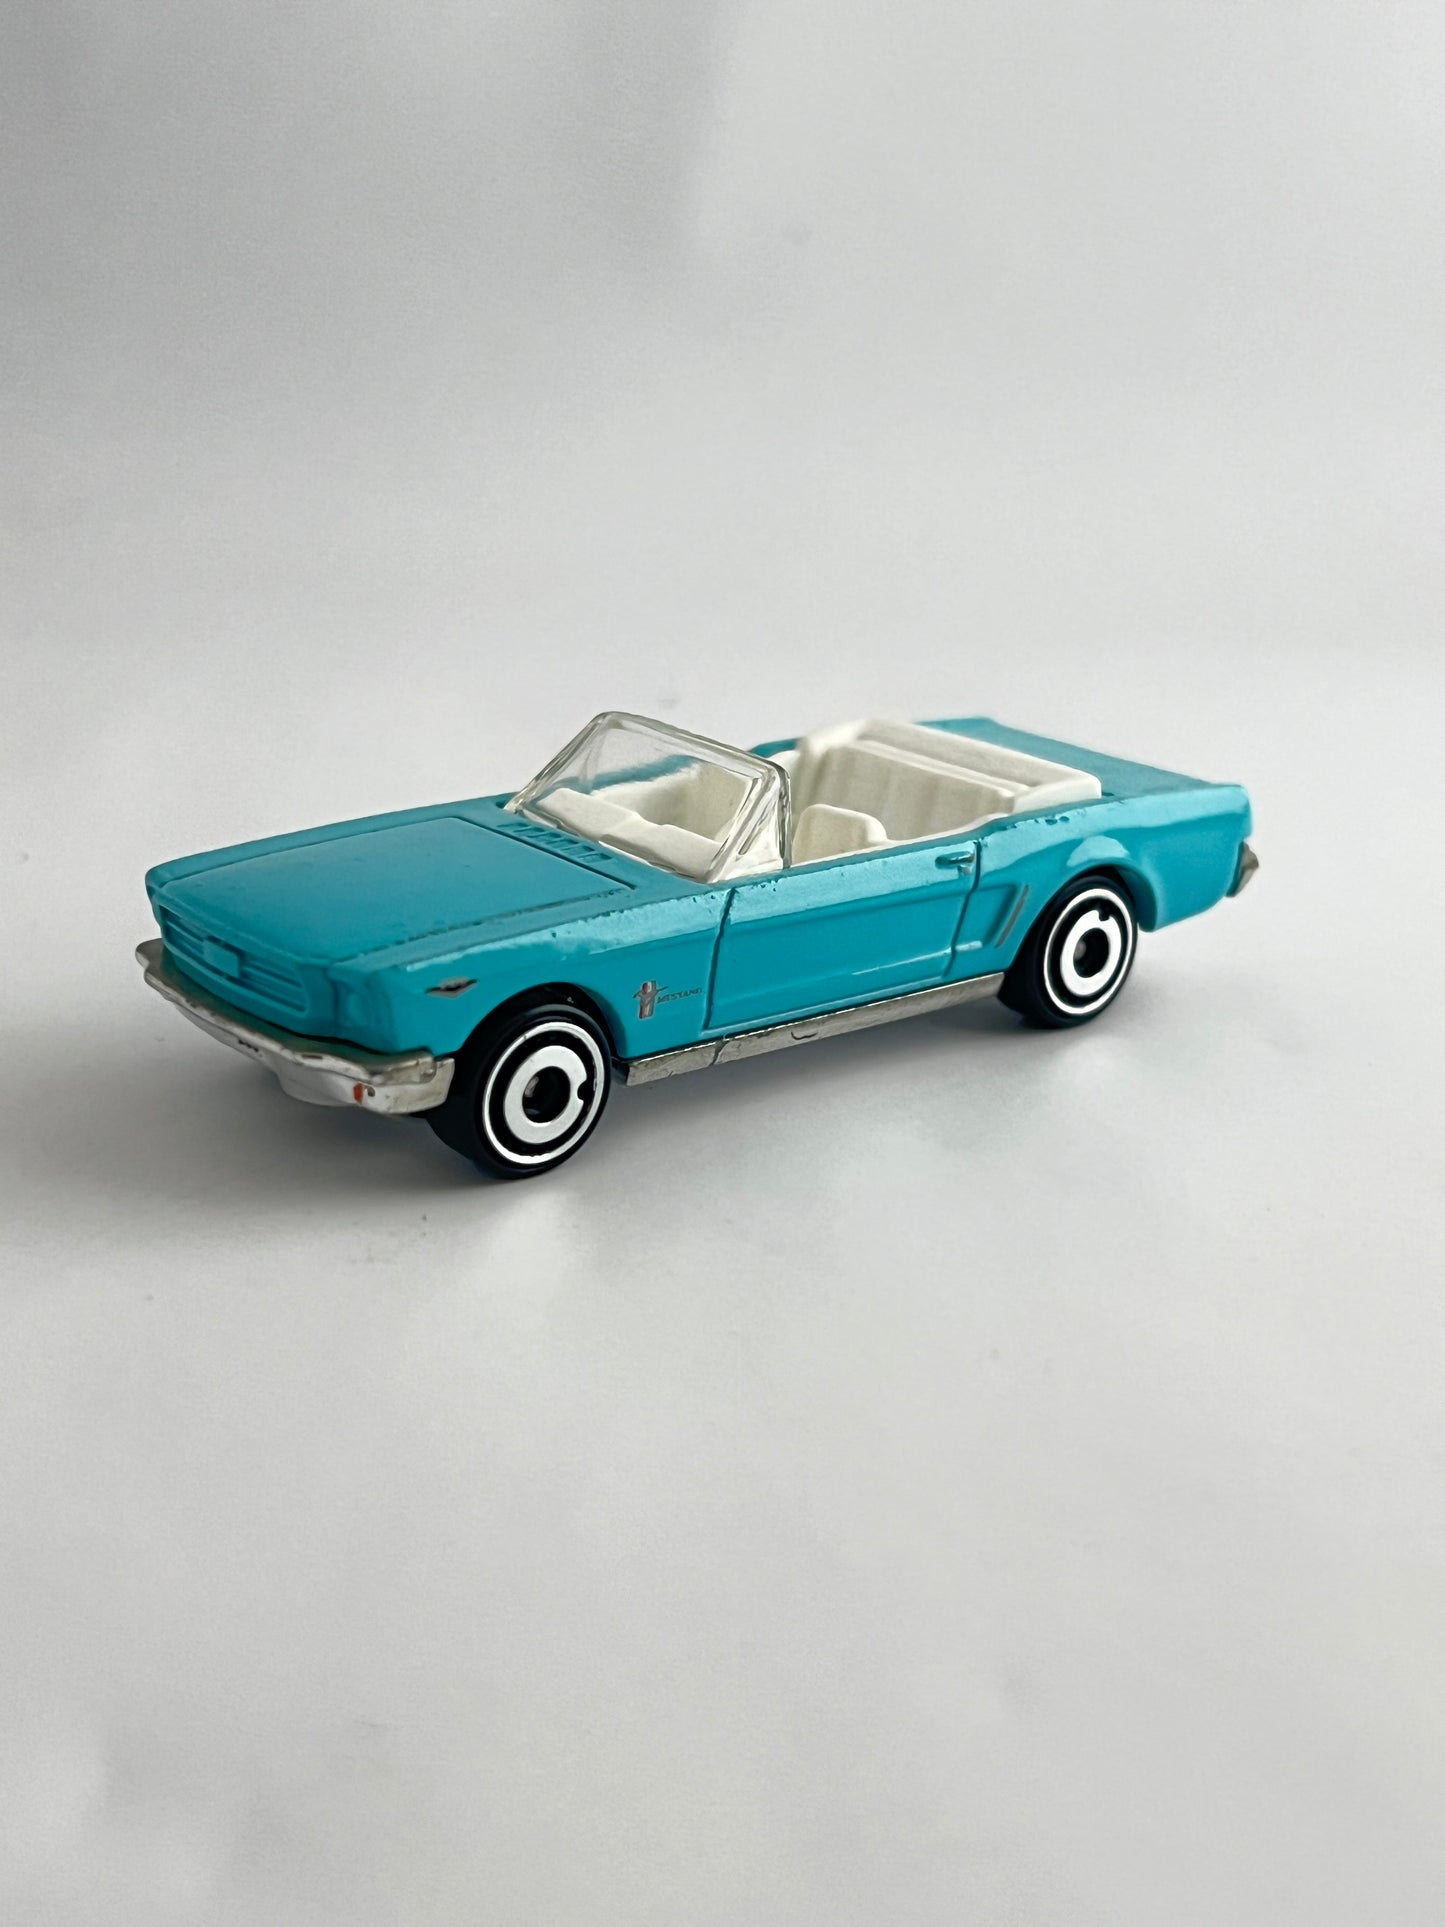 65 MUSTANG CONVERTIBLE - UNCARDED - MINT CONDITION